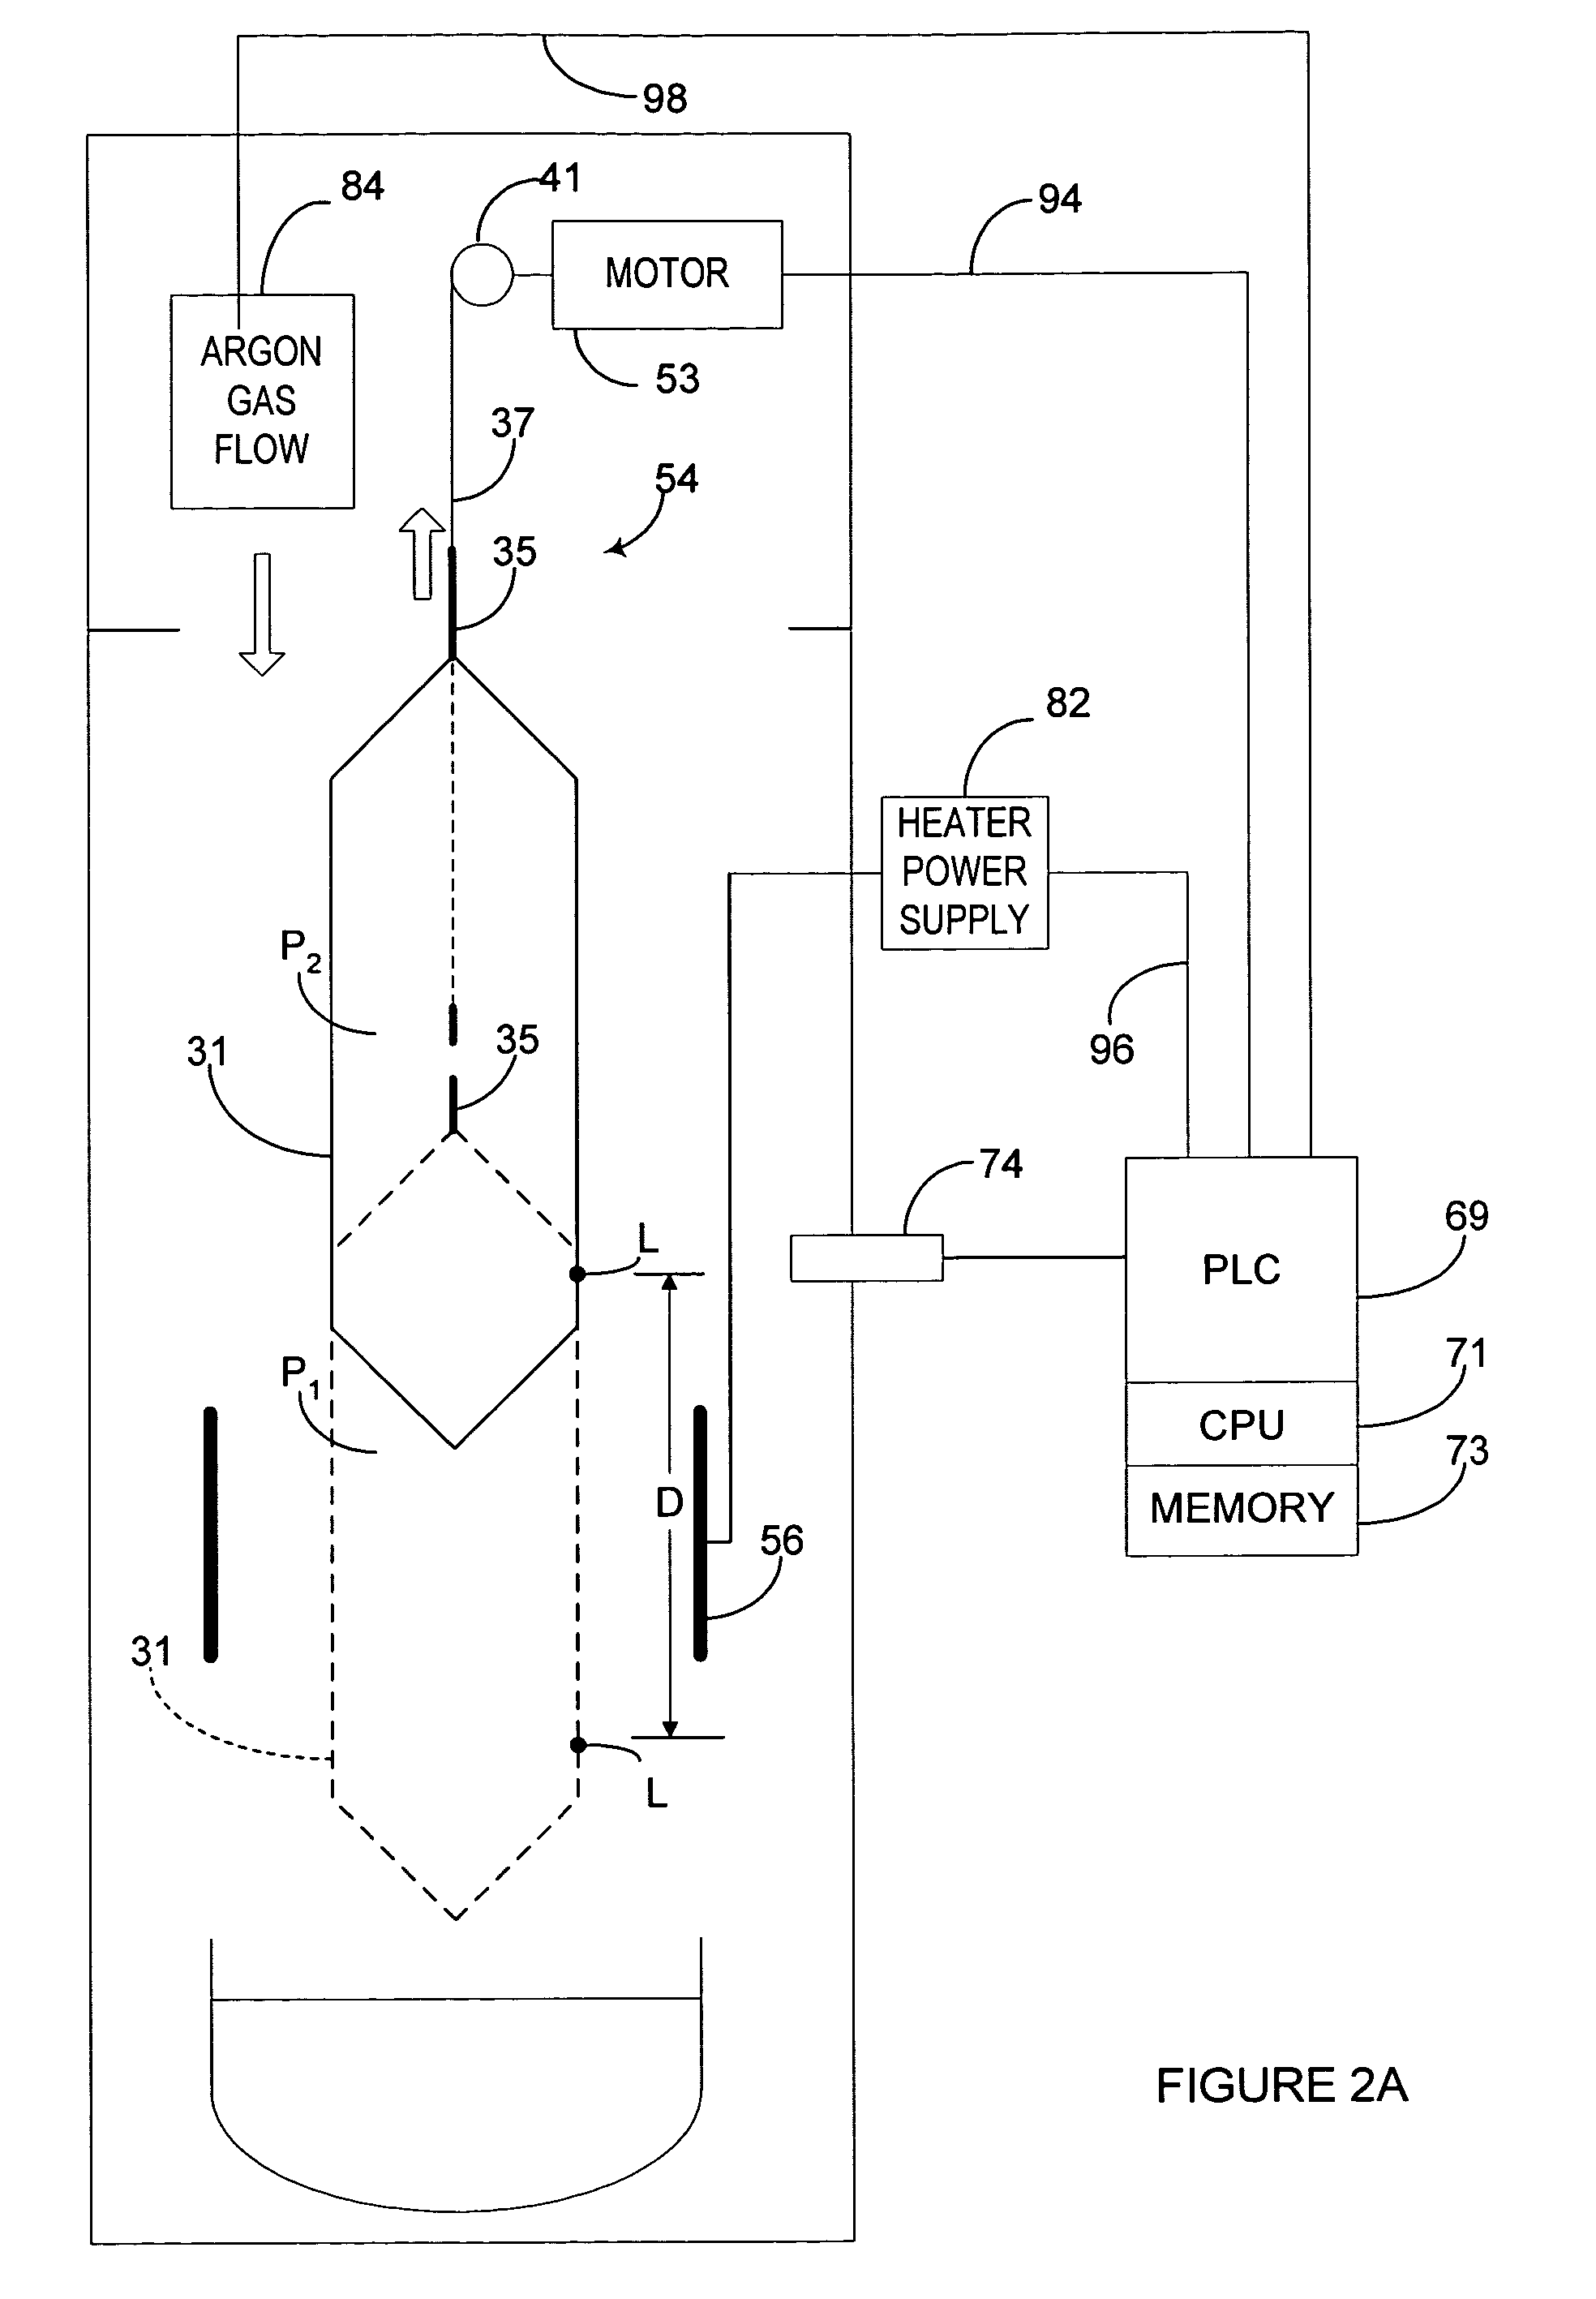 Method to monitor and control the crystal cooling or quenching rate by measuring crystal surface temperature